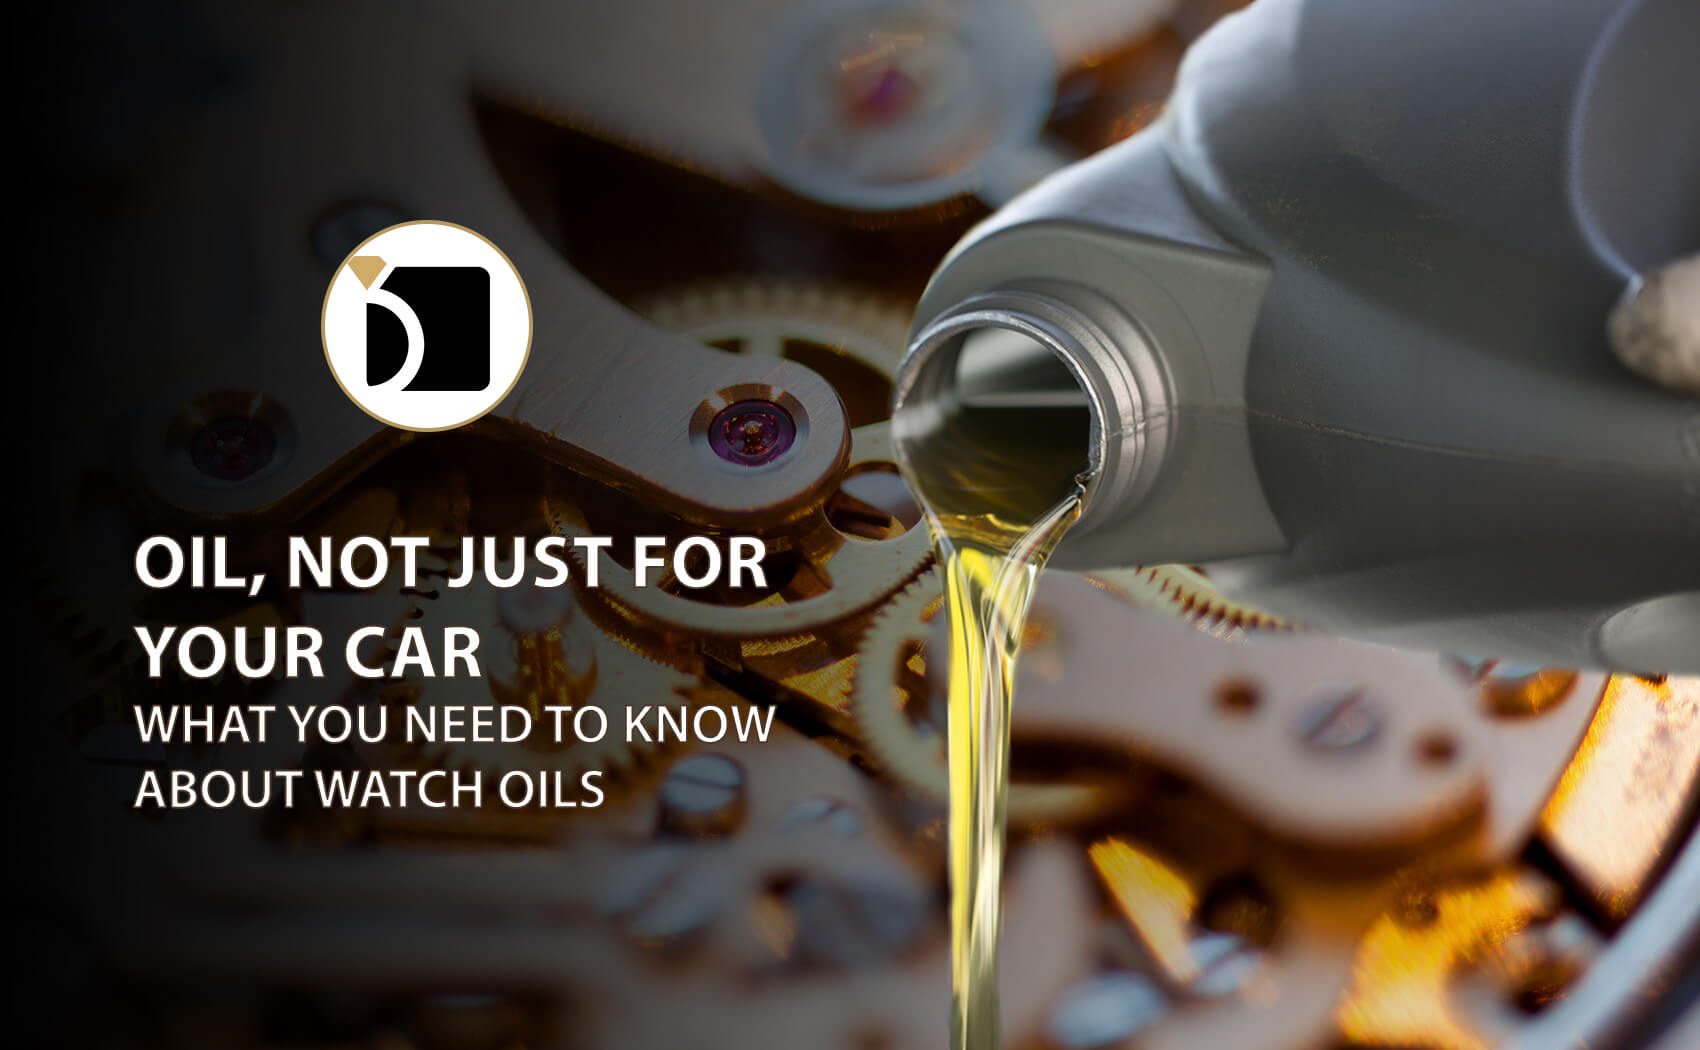 Image Showing Motor Oil instead of Watch Oil